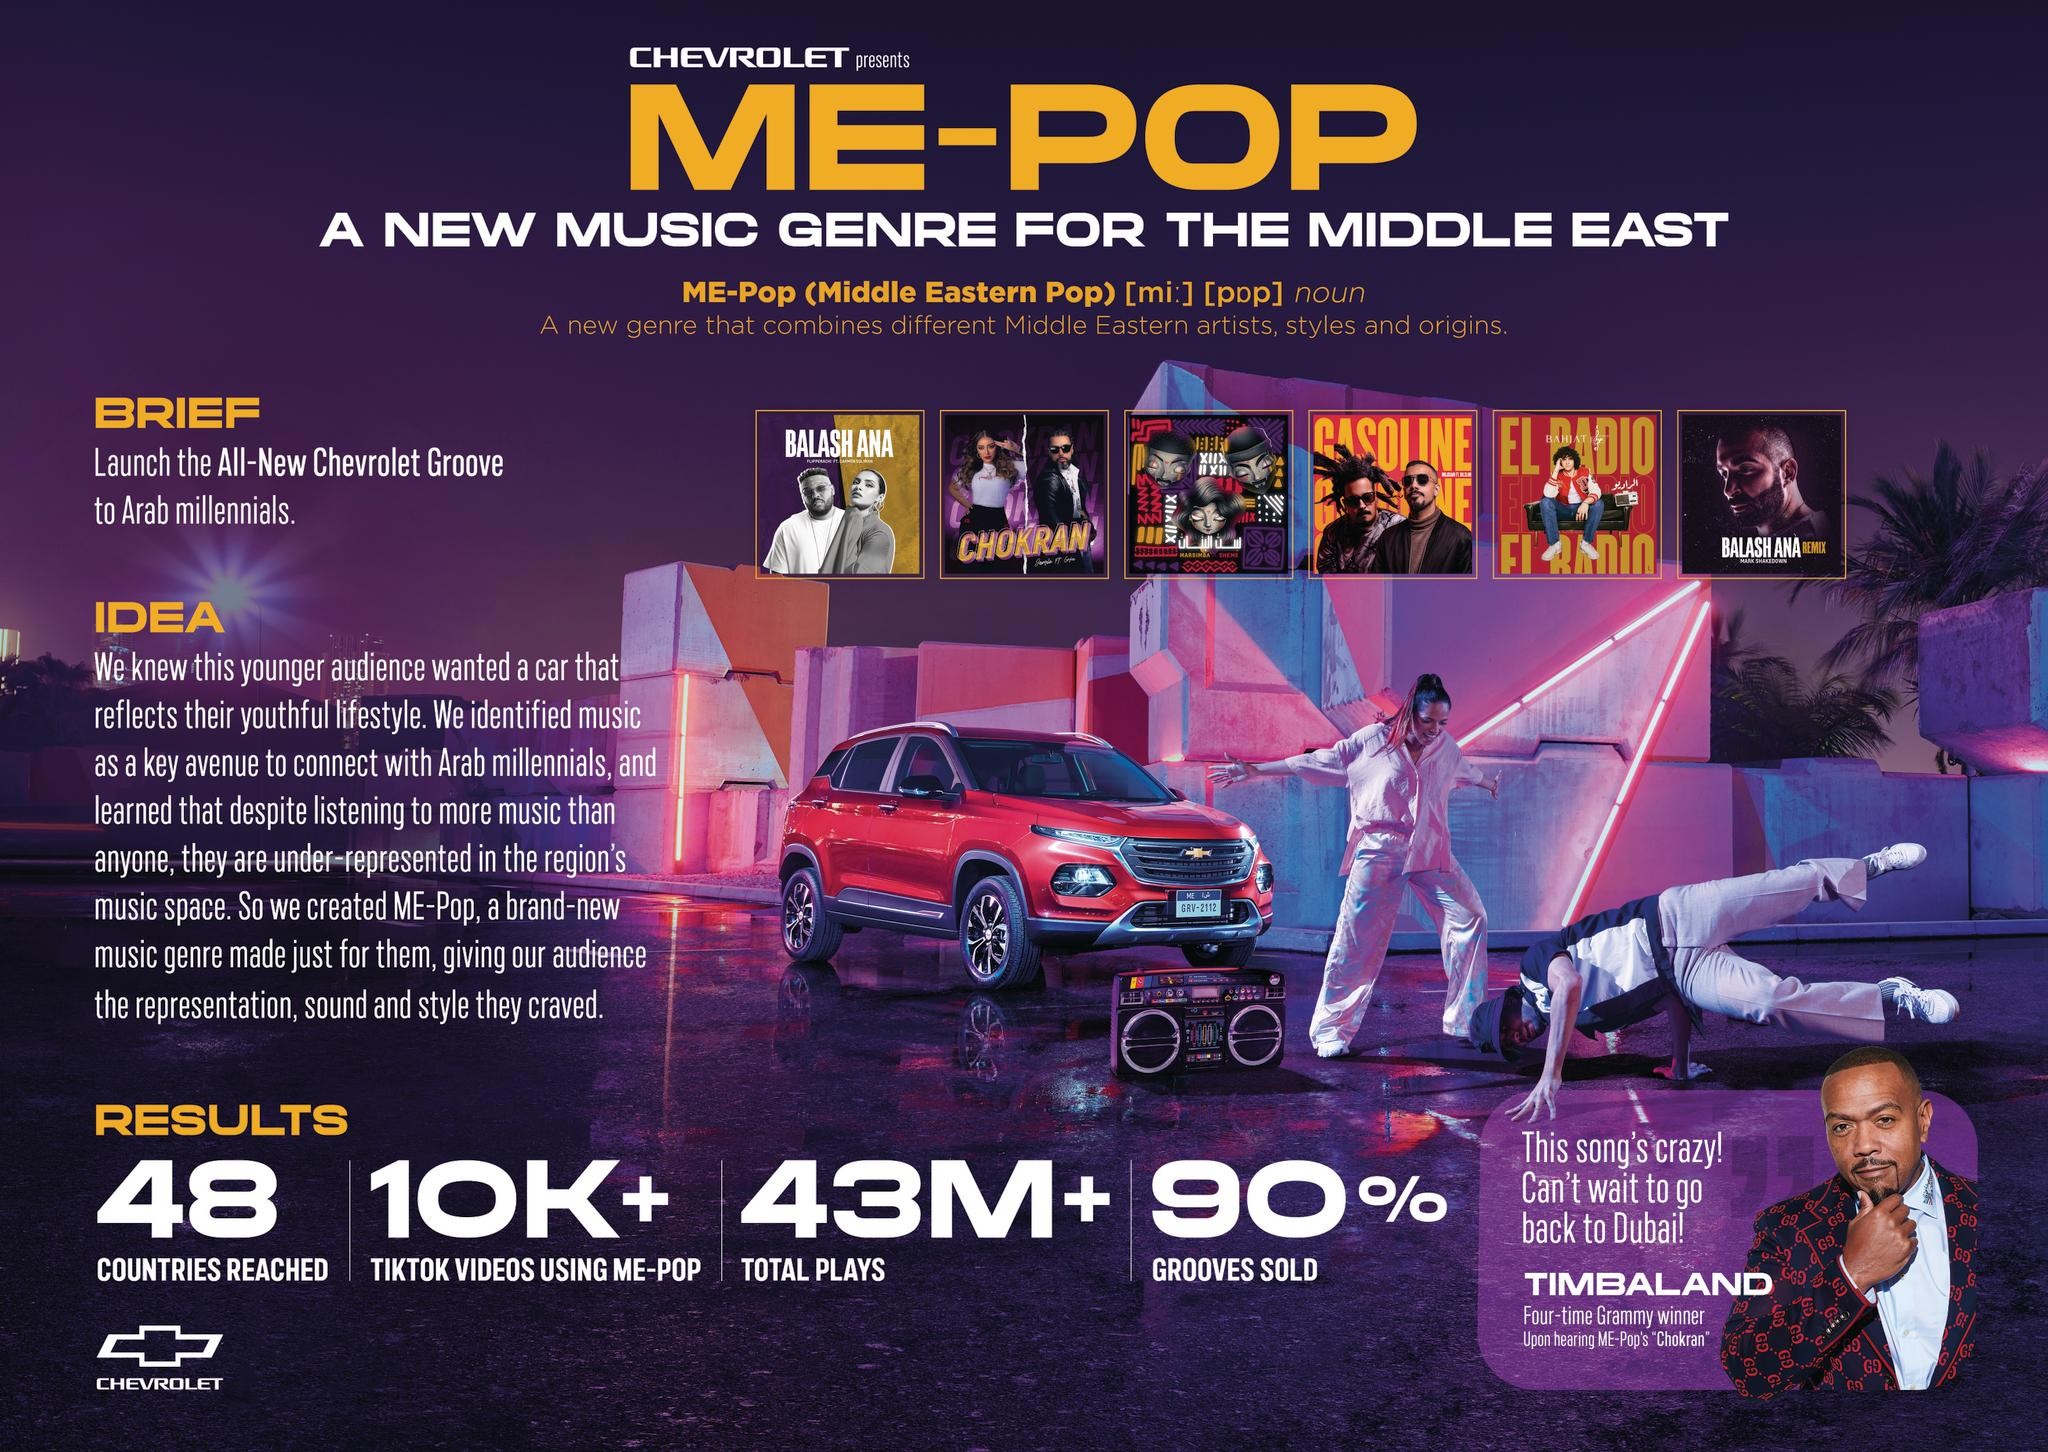 ME-POP: A NEW MUSIC GENRE FOR THE MIDDLE EAST